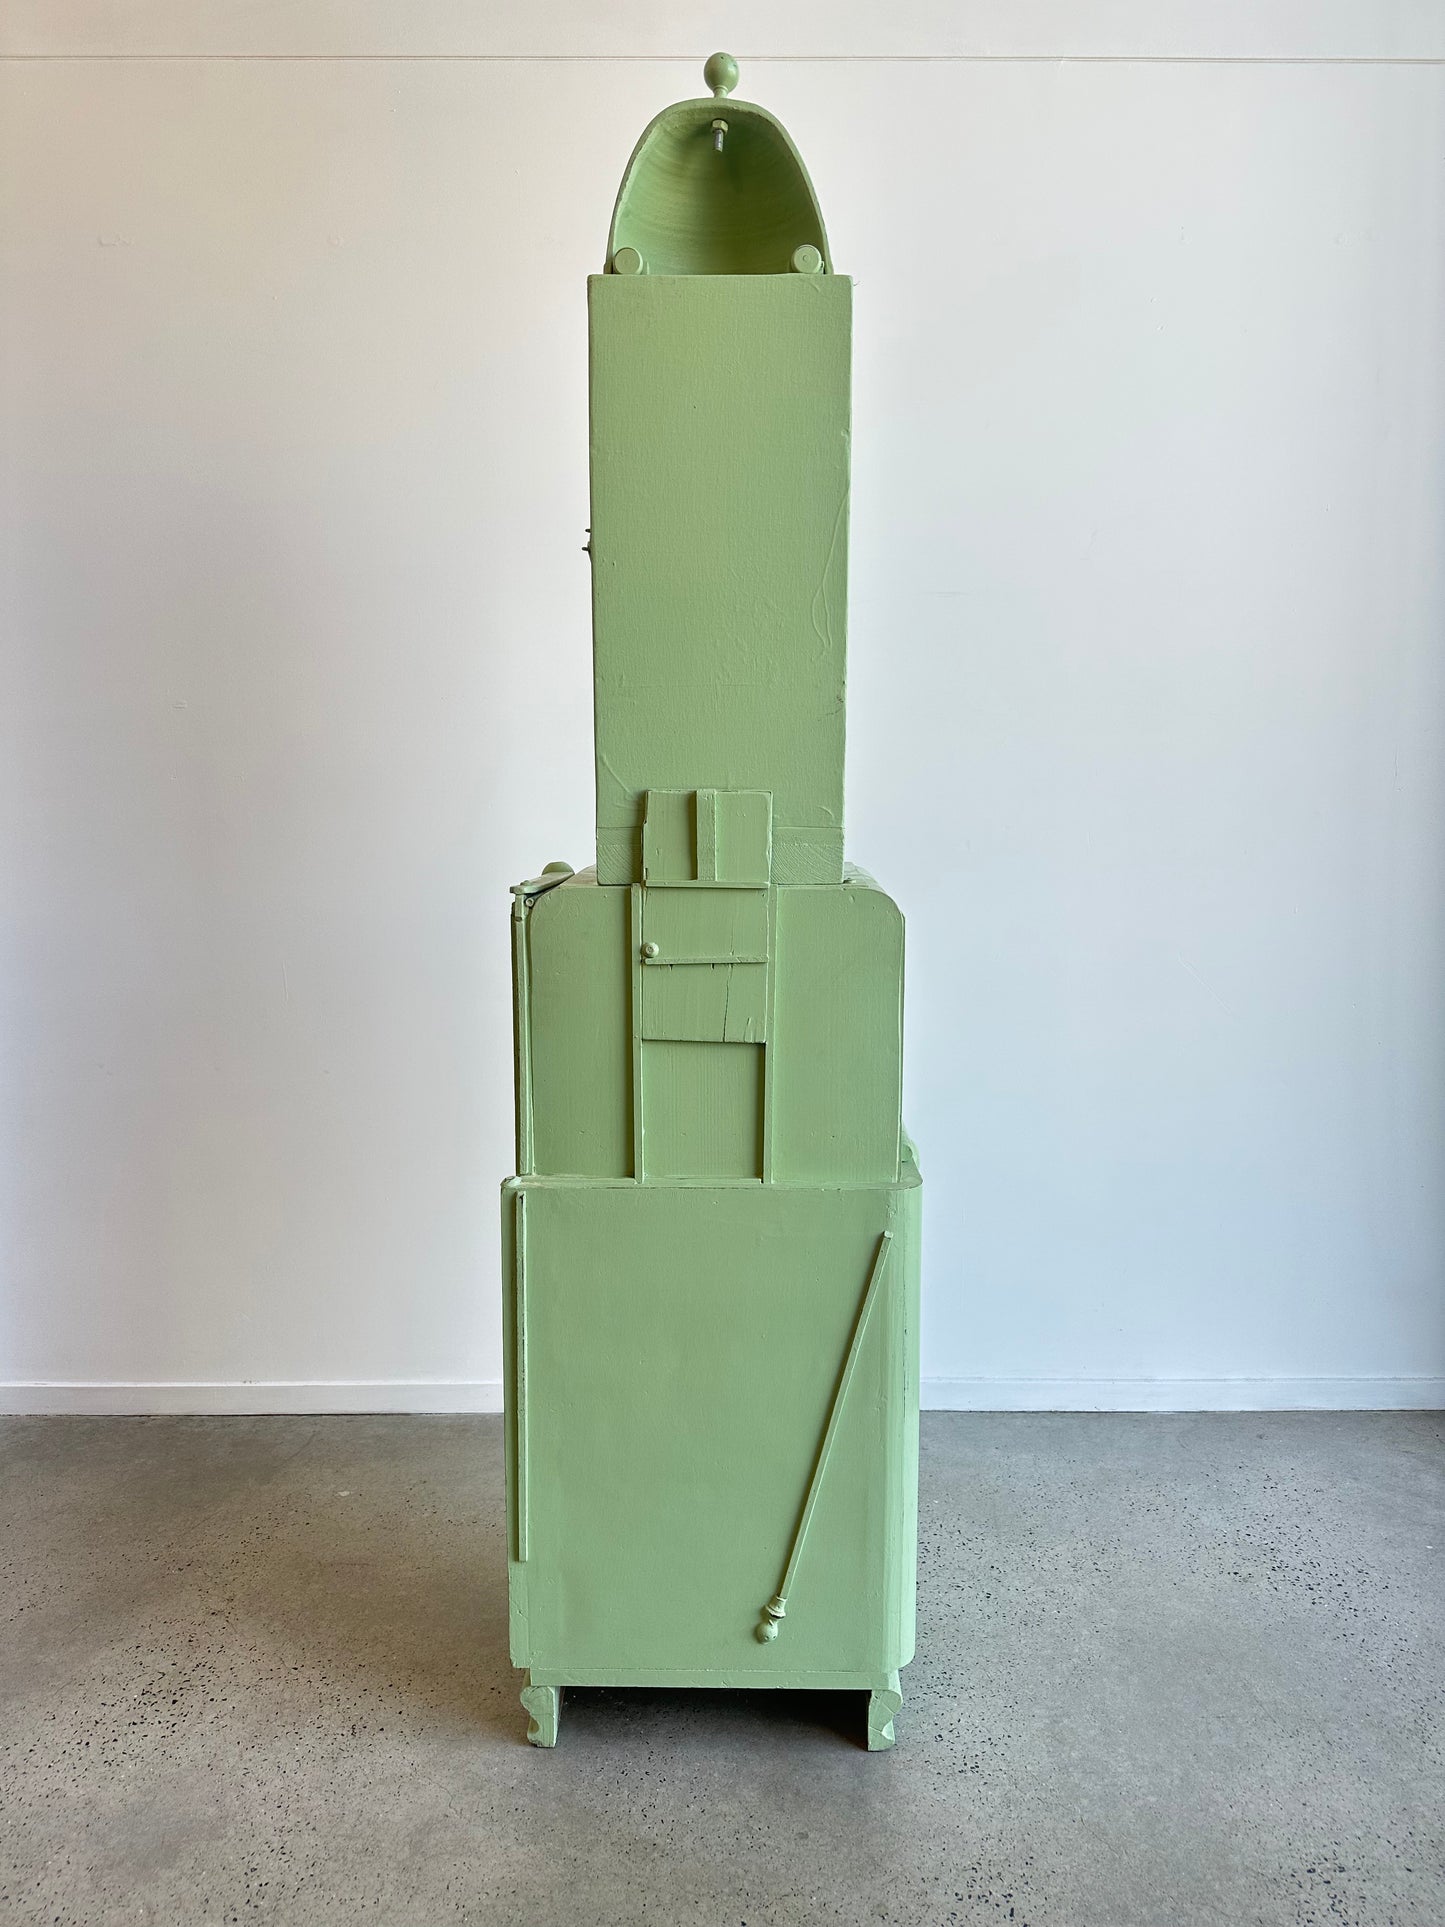 Cabinet Contemporary Light Green Functional Sculpture by Paolo Lumini, Tuscany Italy